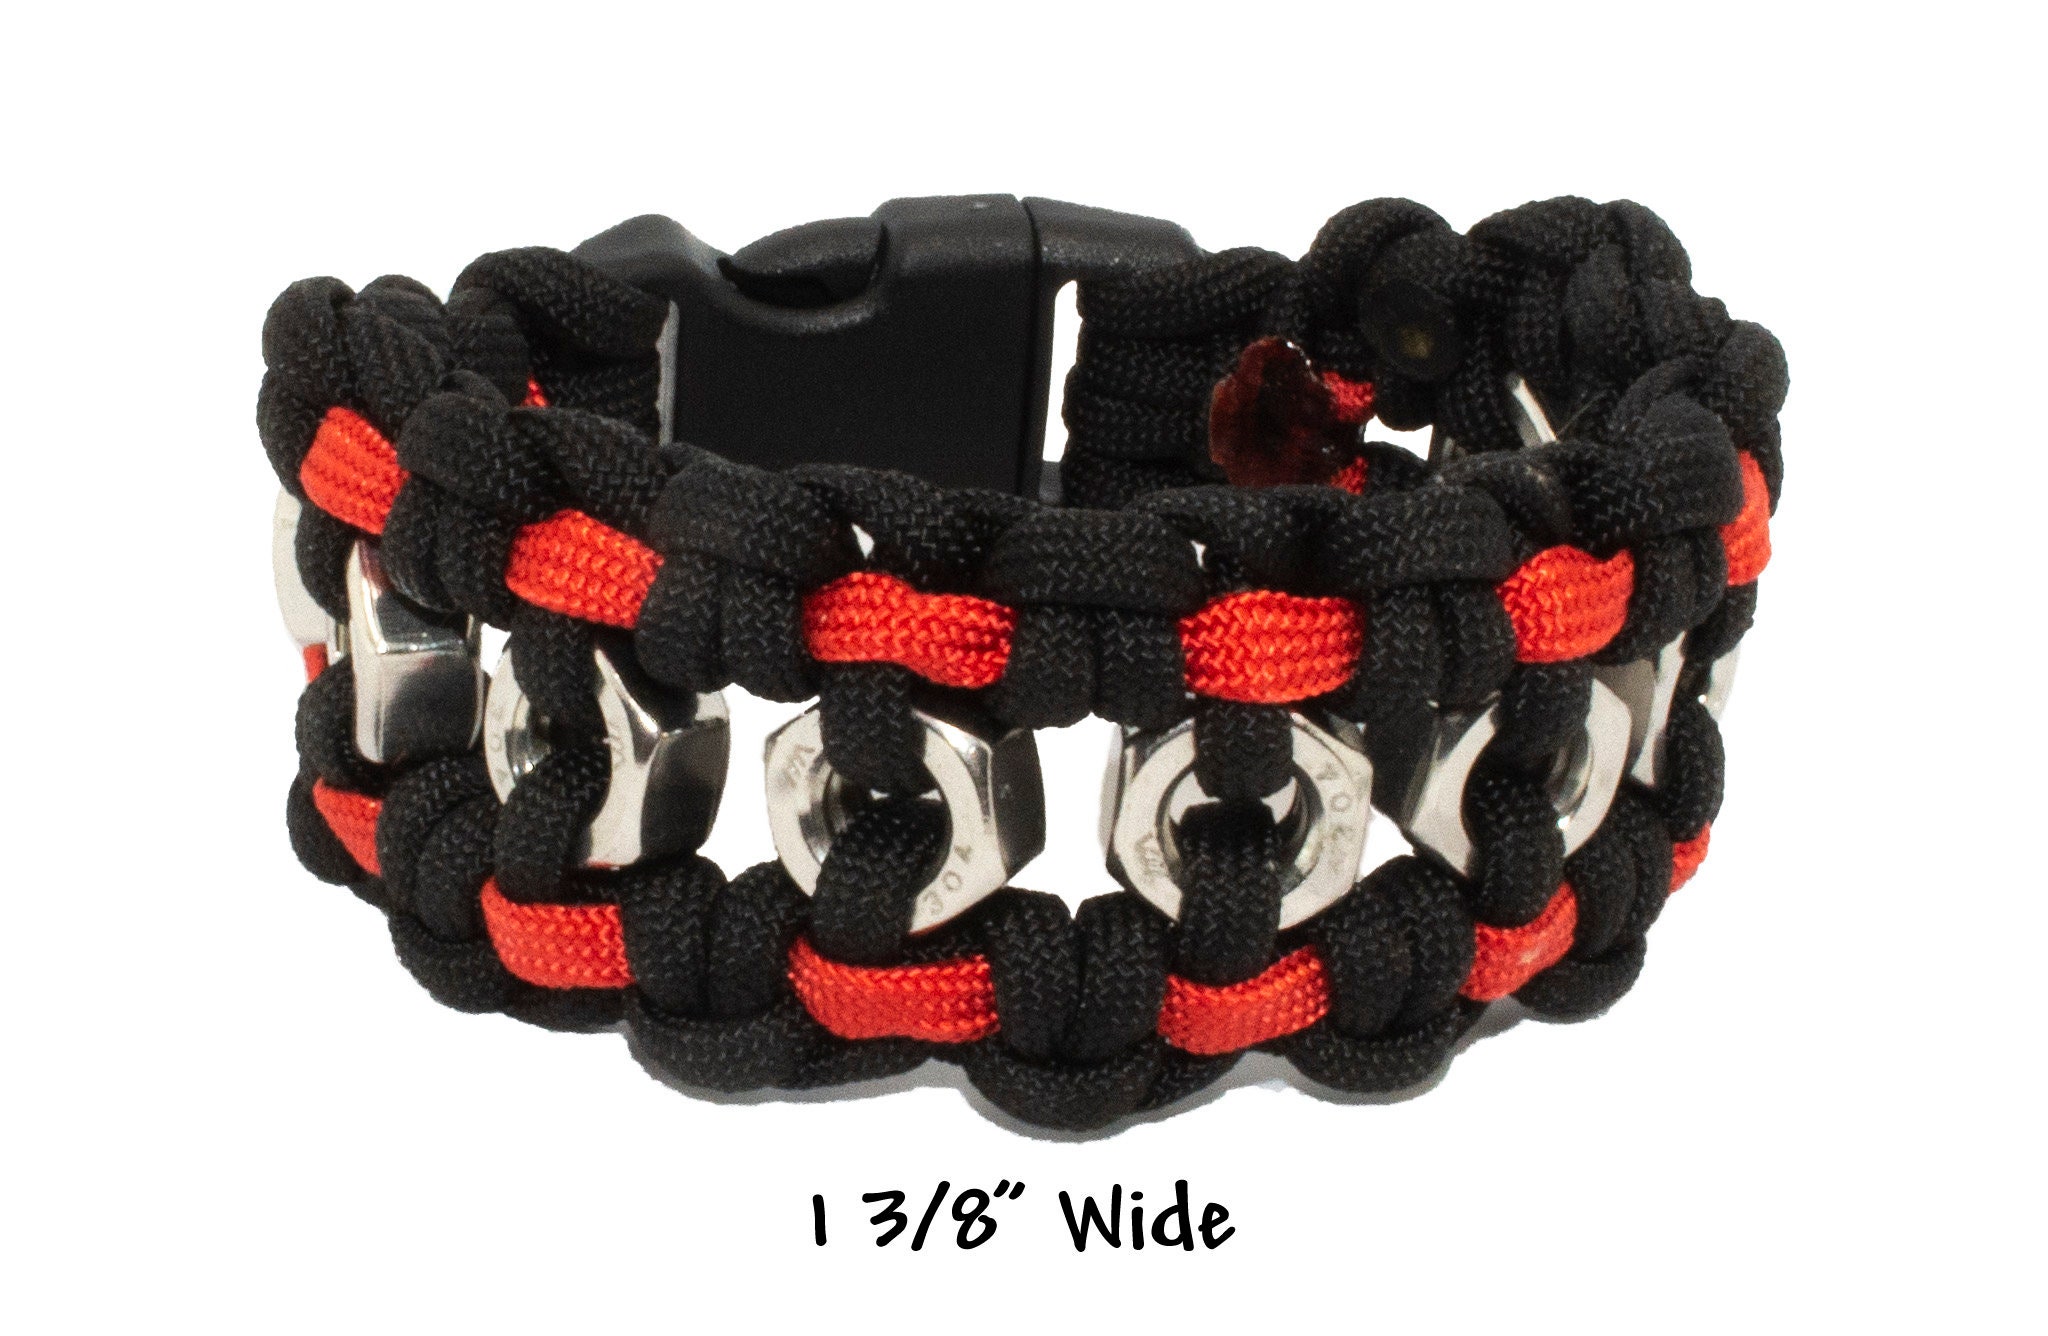 Buy Hex Nut Paracord Survival Bracelet Any Size 4.99 Shipping Online in  India 